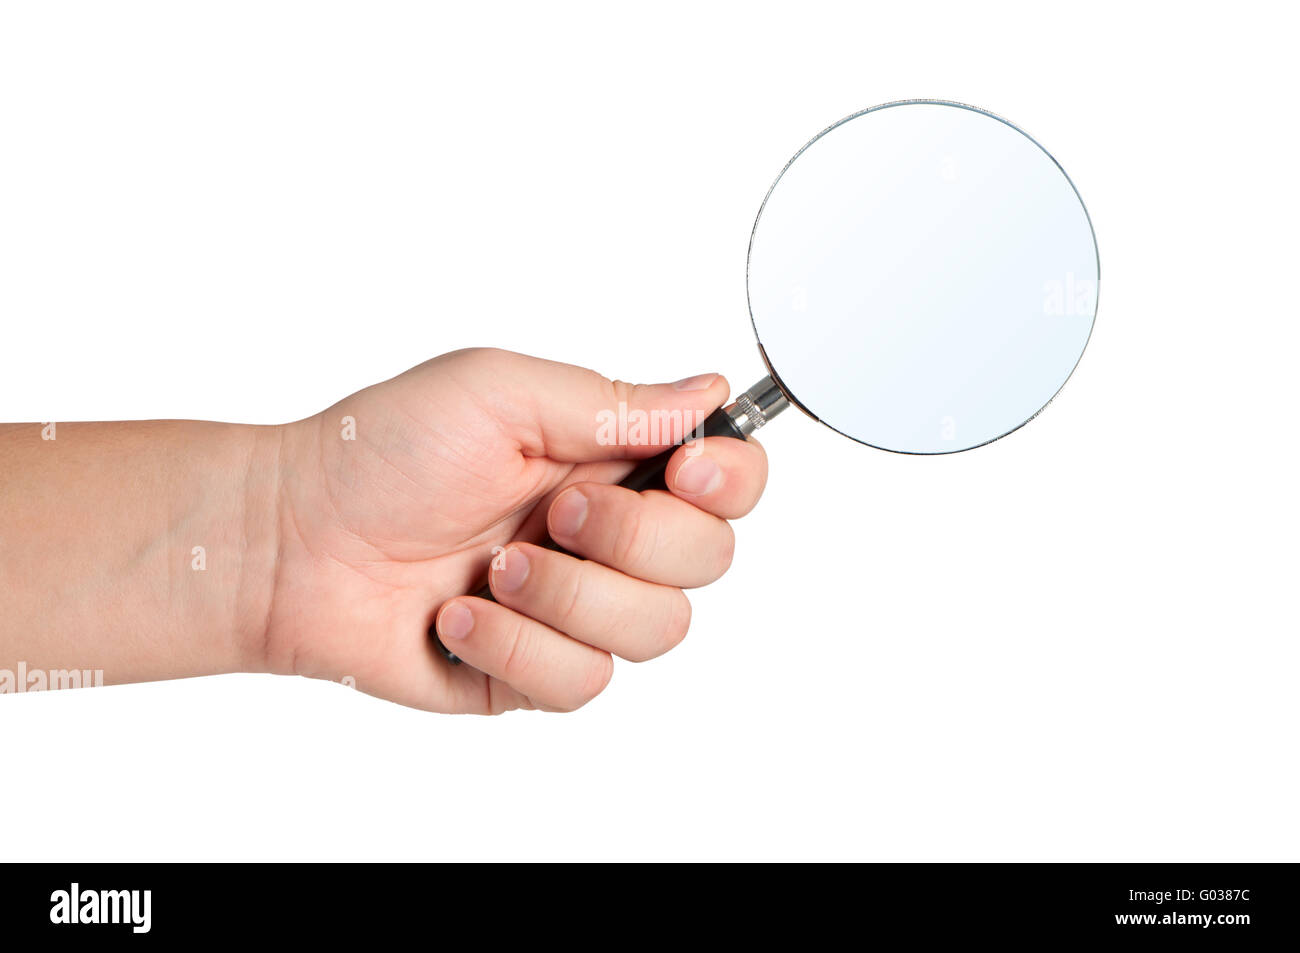 Magnifying glass in hand isolated on white background. Stock Photo